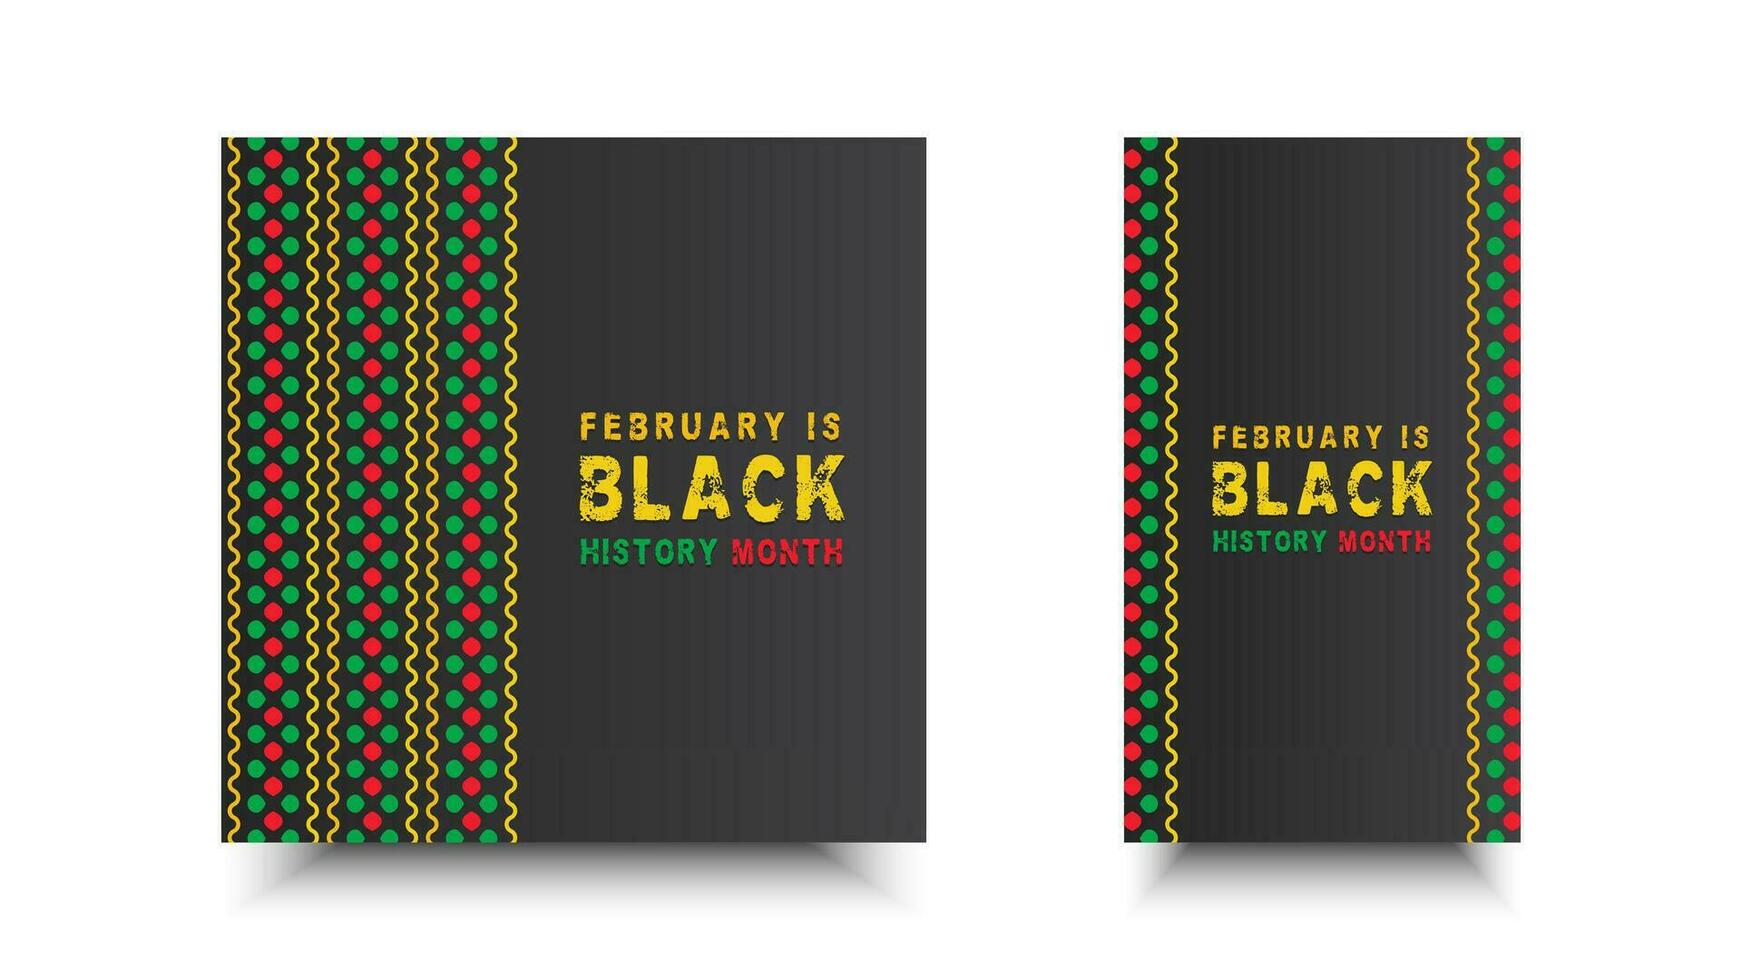 Black history month vector design. African American celebration template for background, banner, poster